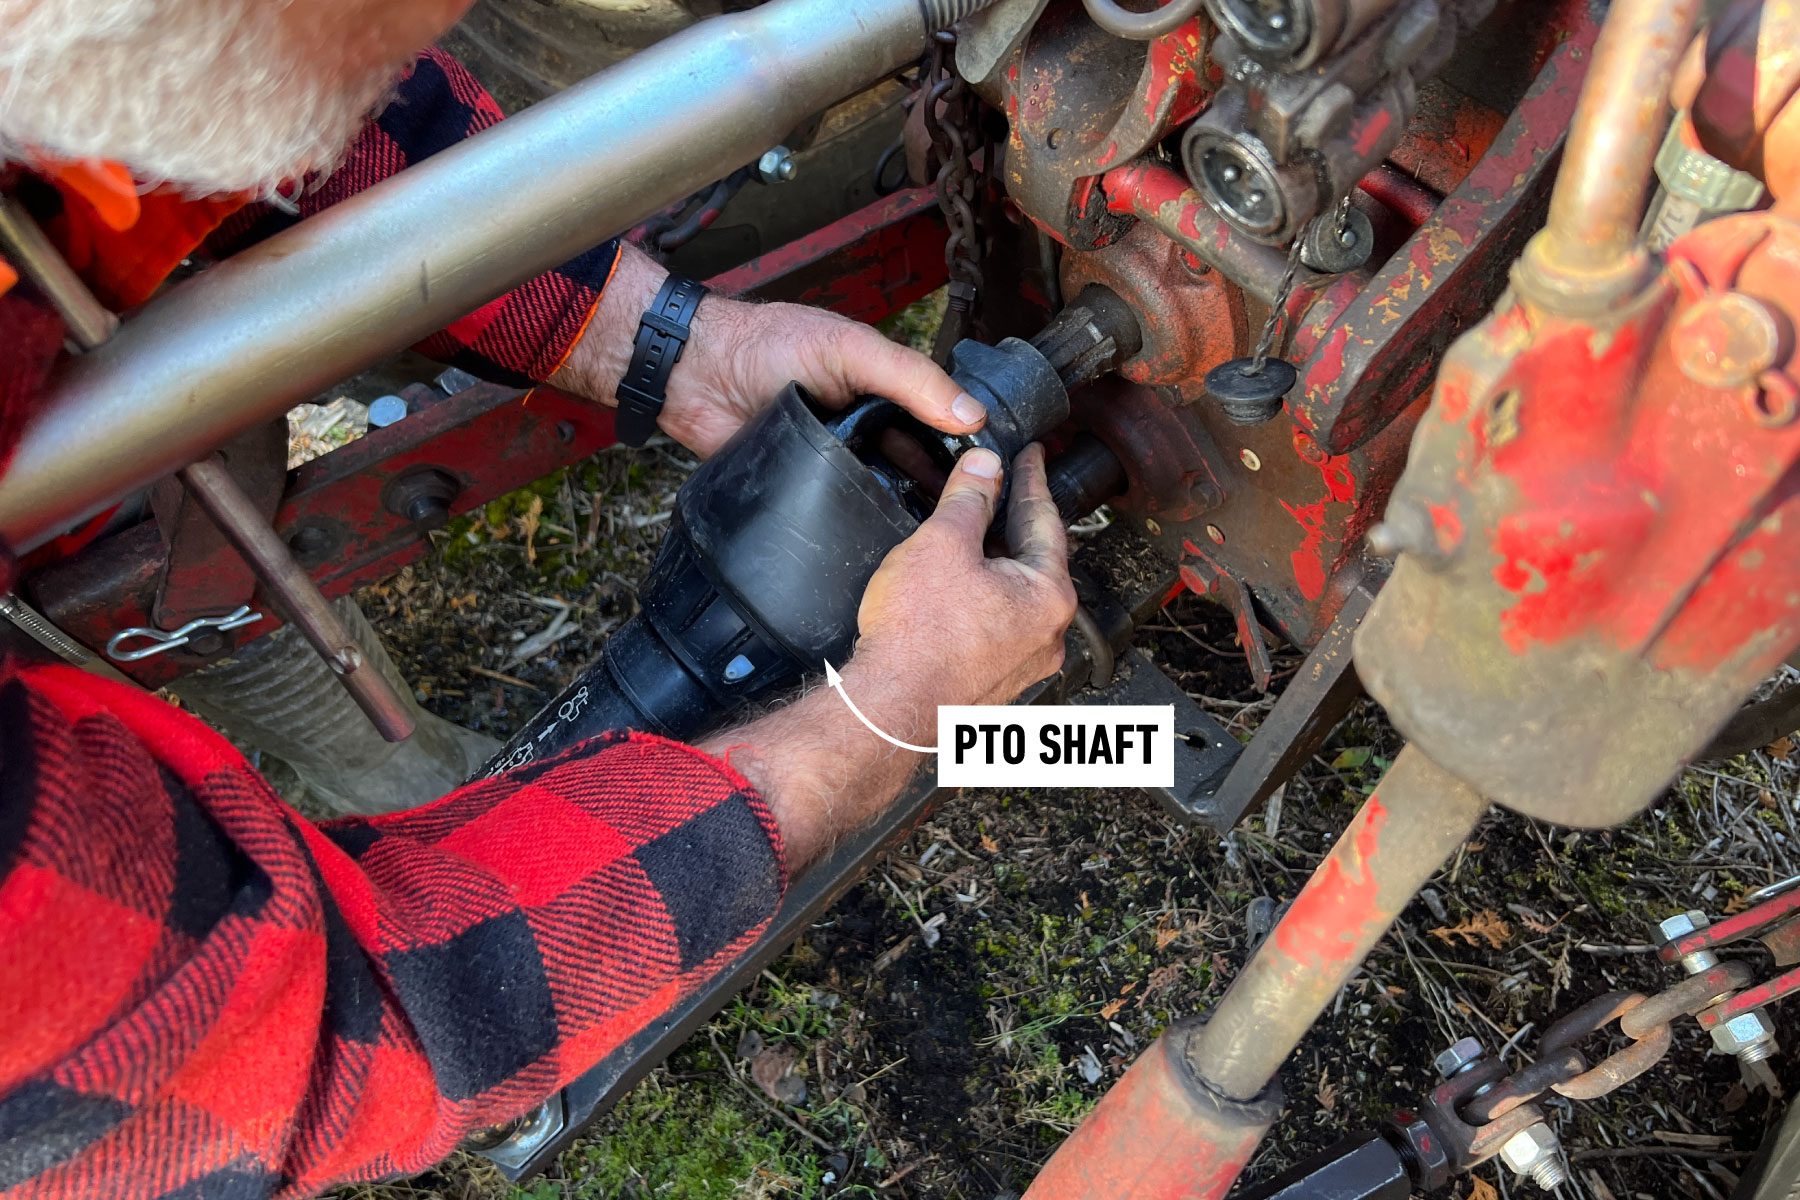 How To Mount A Pto Wood Chipper To A Tractor Connect Pto Shaft